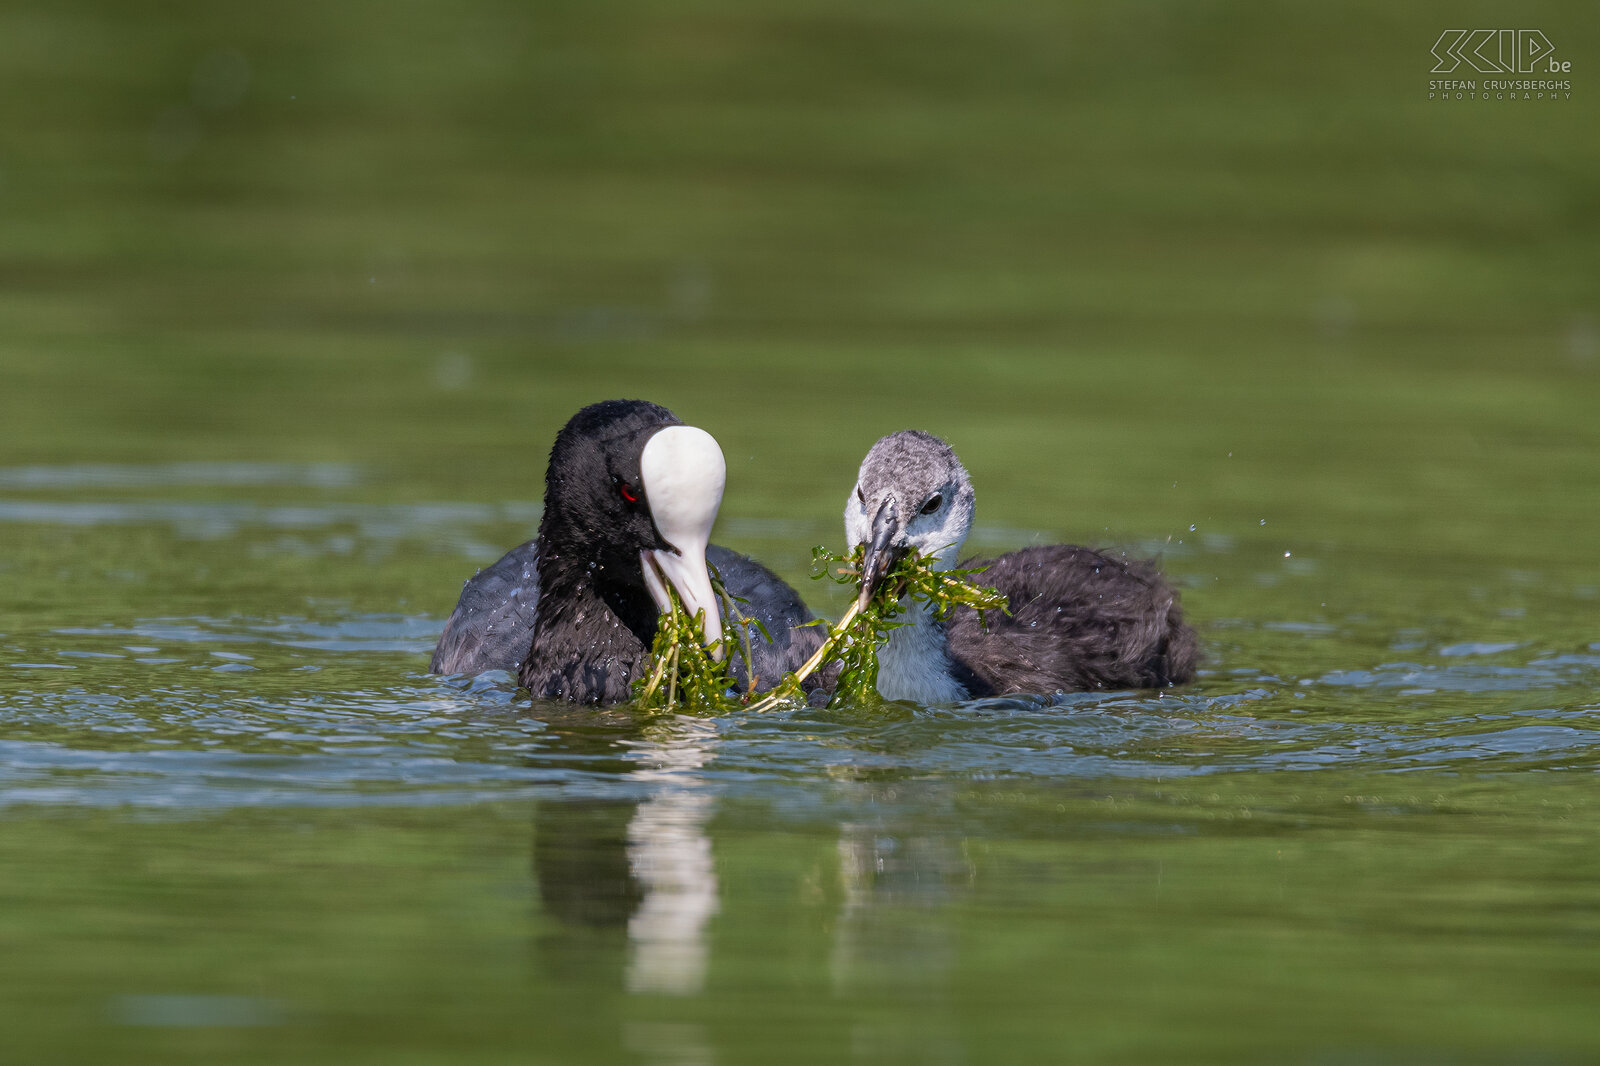 Water birds - Coot with chick Eurasian coot / Fulica atra Stefan Cruysberghs